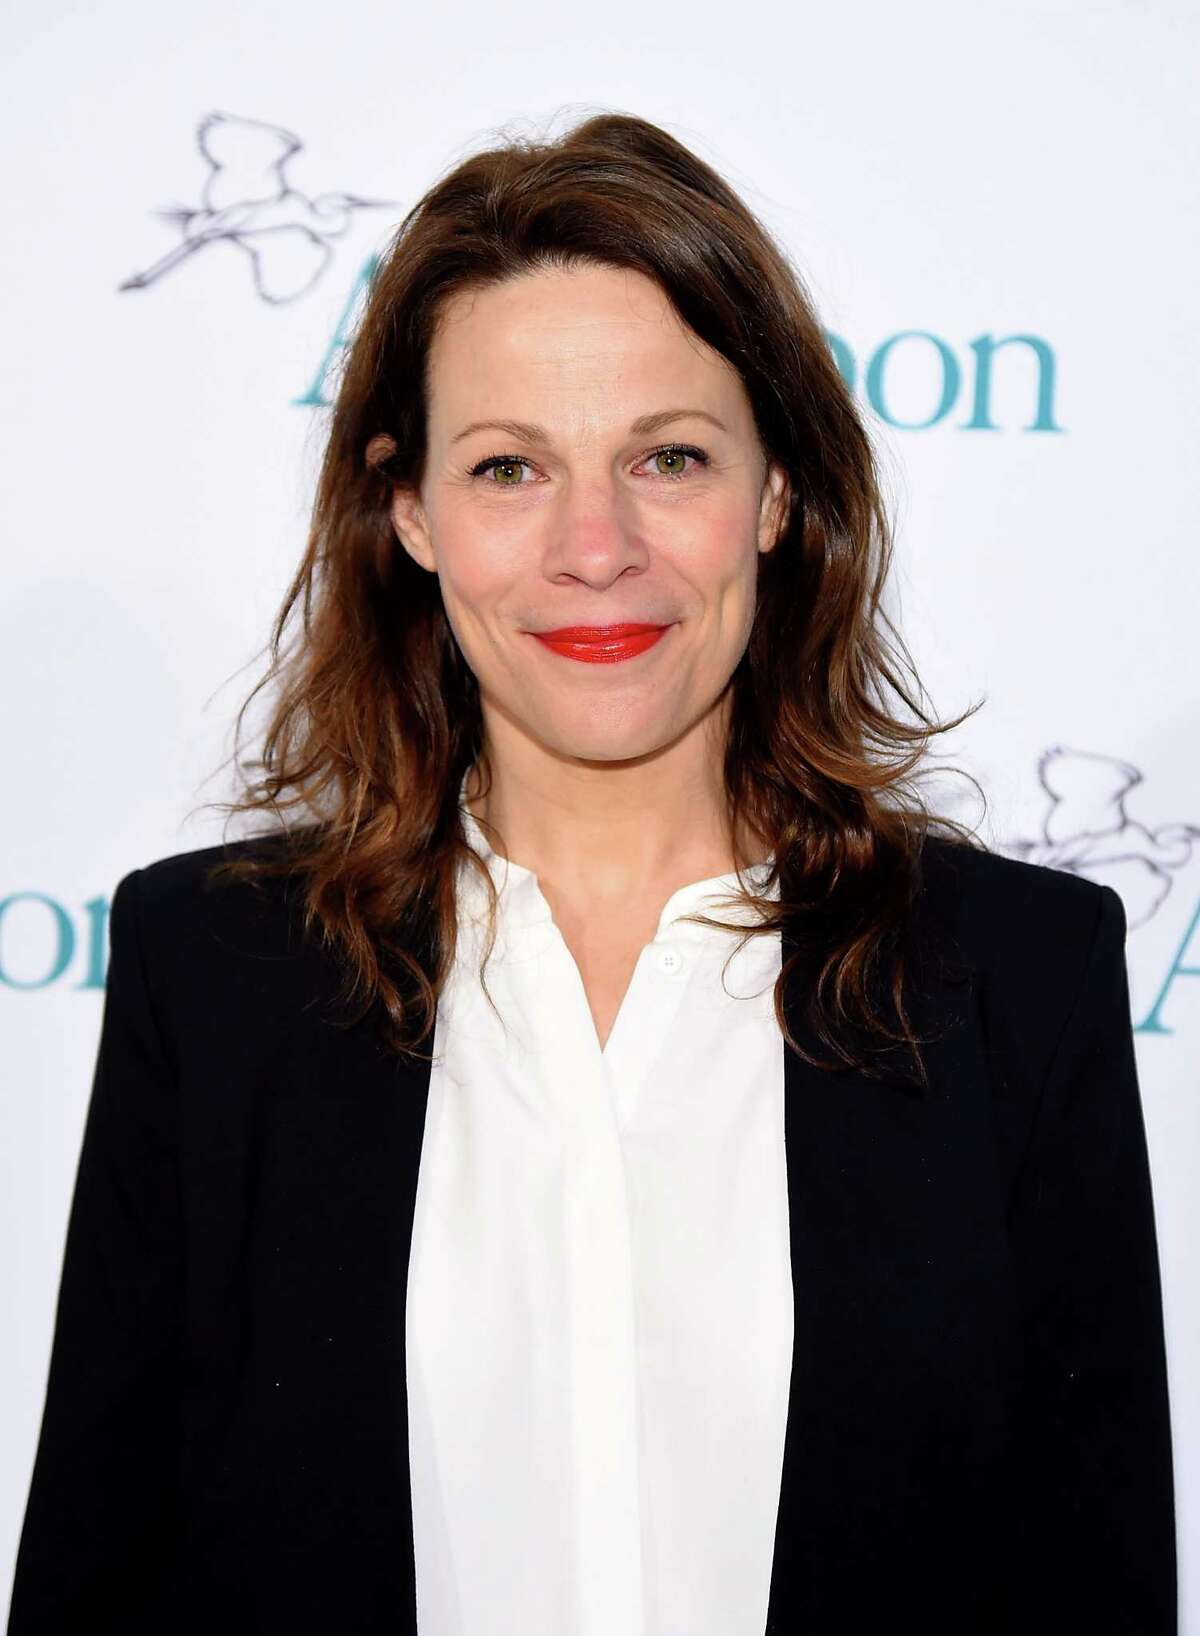 Actress Lili Taylor, above, will star in Suzanne Bocanegra's performance piece "Bodycast." ﻿